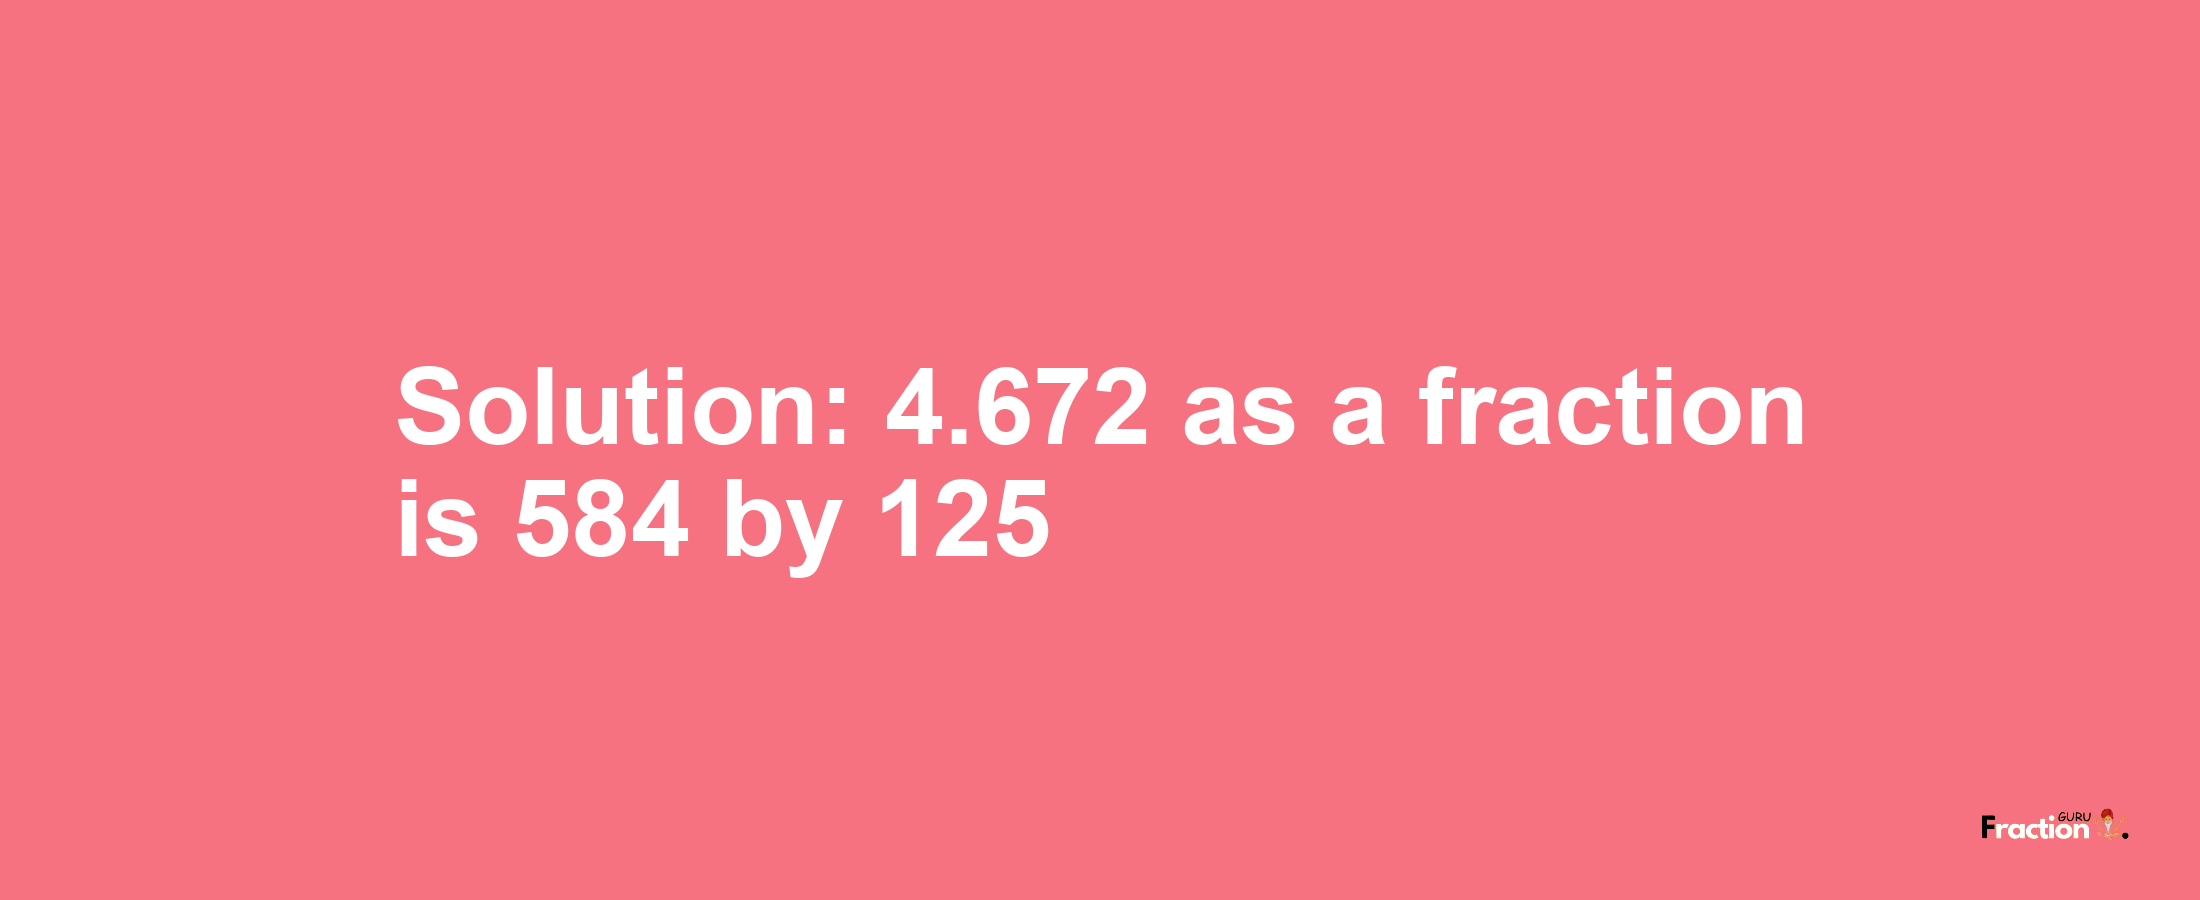 Solution:4.672 as a fraction is 584/125